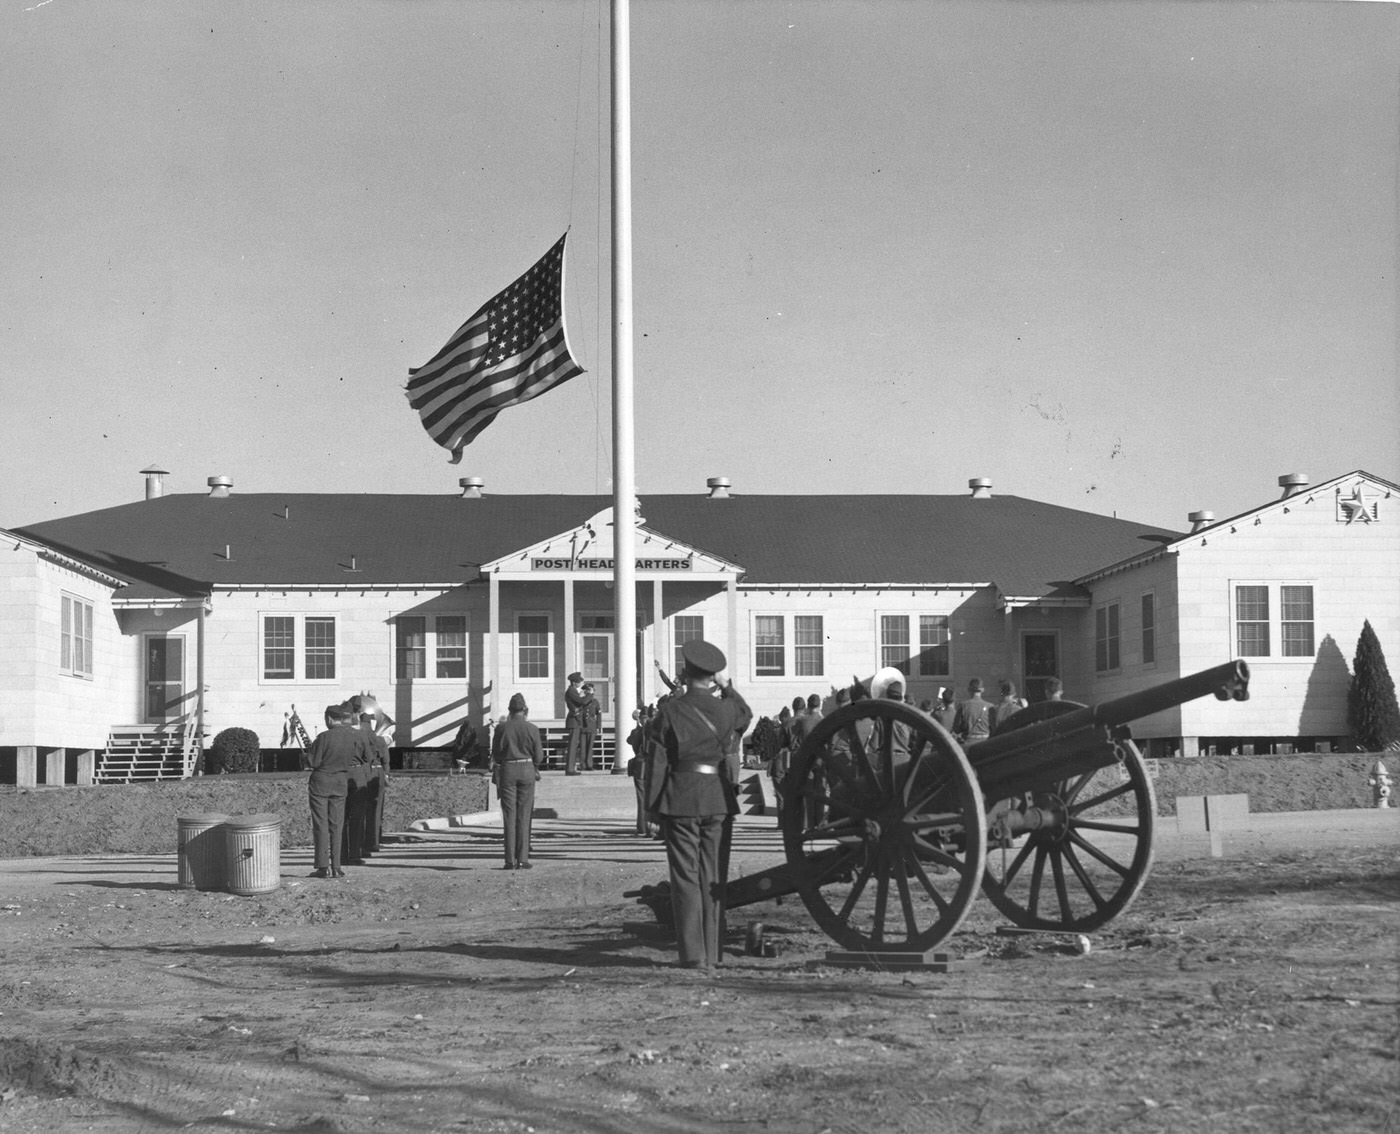 Retreat soldiers saluting lowering of flag as cannon booms, 1943